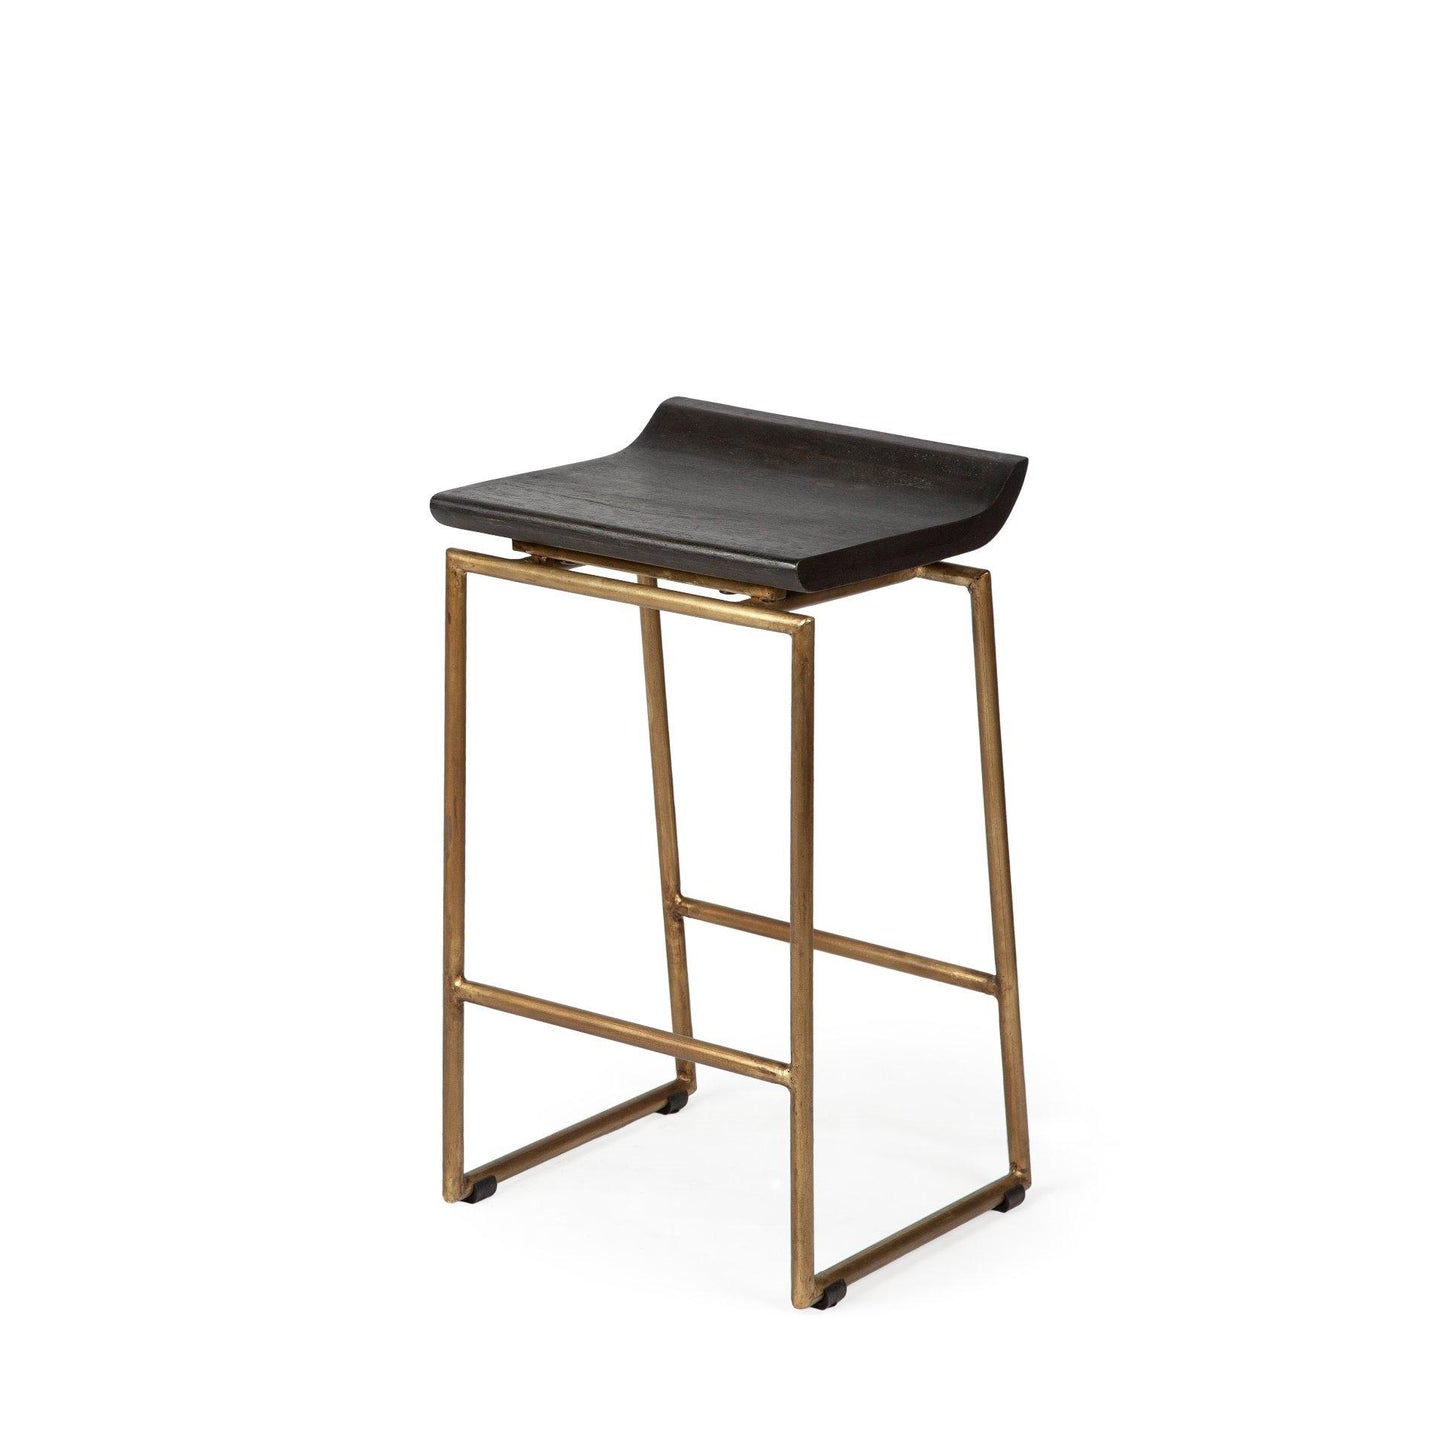 Givens 24.25" Seat Height Brown Wood Seat Gold Metal Frame Stool